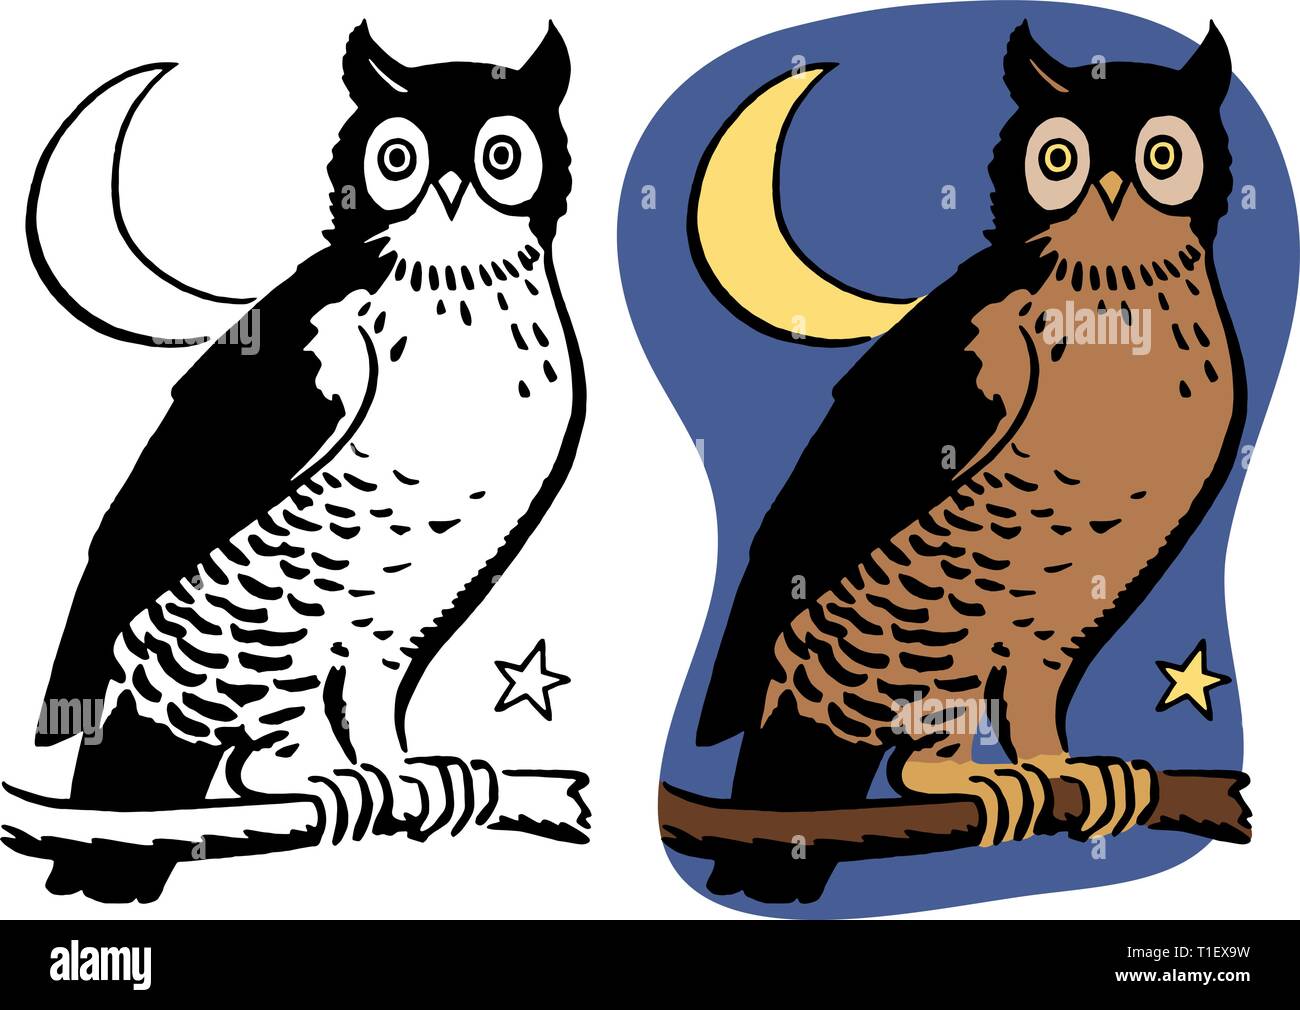 A night owl perched on a branch in front of a crescent moon. Stock Vector